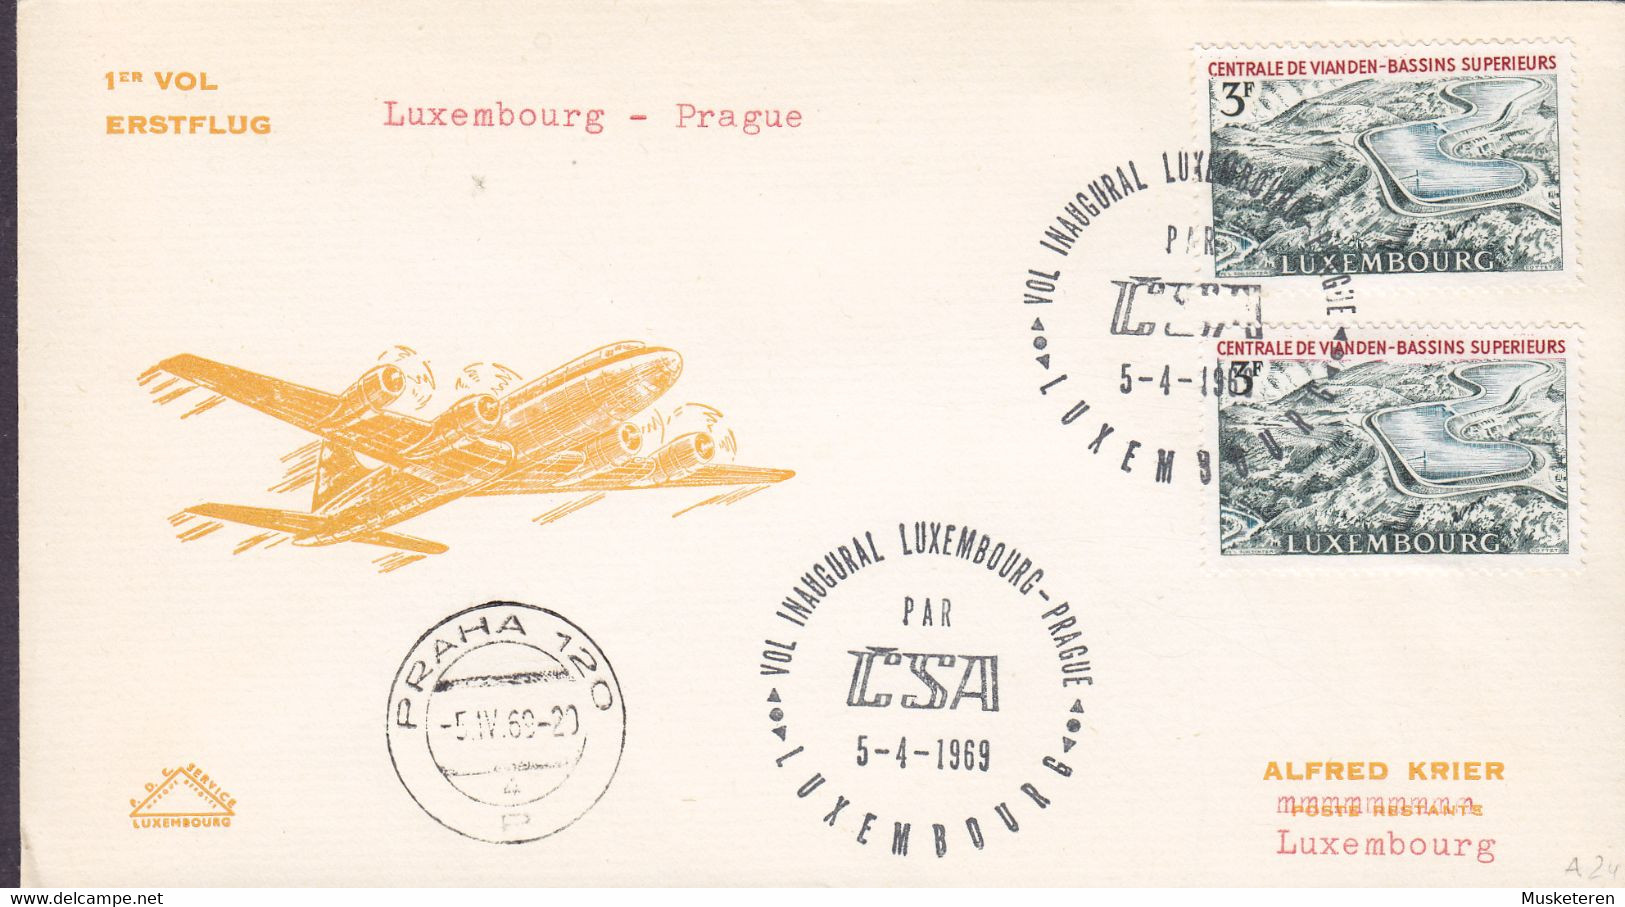 Luxembourg CSA First Flight Premier Vol LUXEMBOURG - PRAGUE, LUXEMBOURG 1969 Cover Brief Lettre - Briefe U. Dokumente